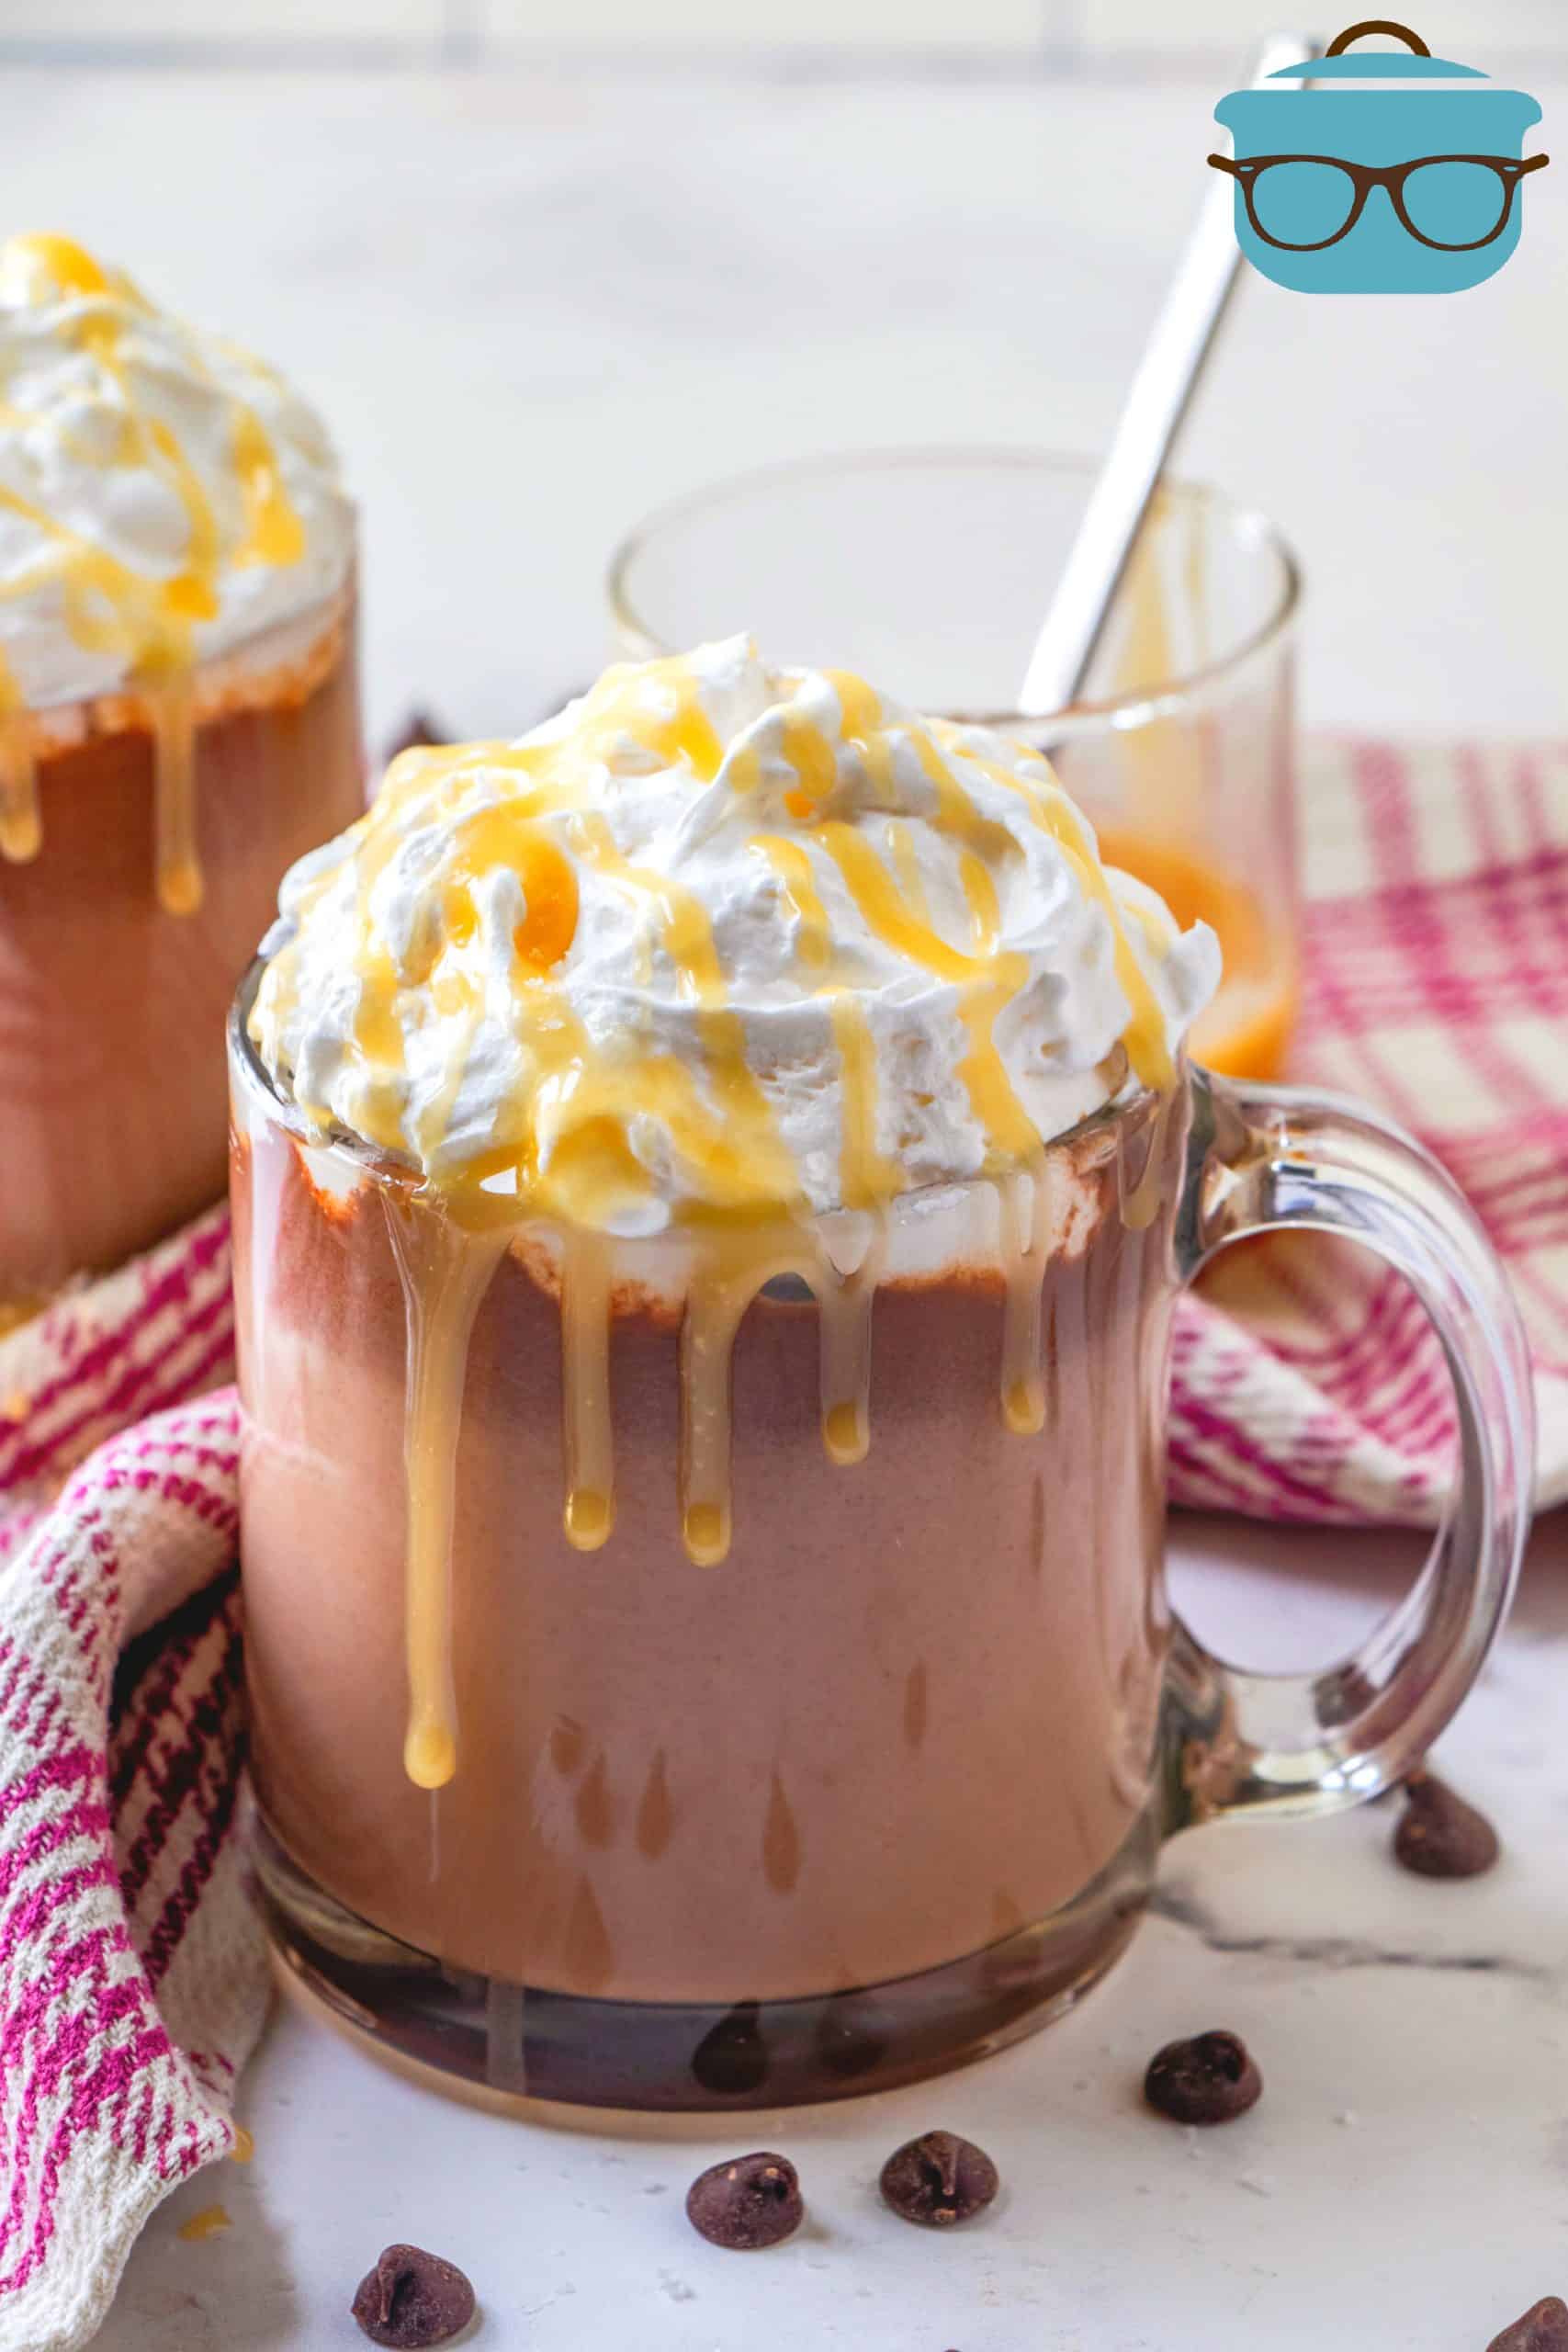 The Best Salted Caramel Hot Chocolate shown in a clear glass mug with chocolate chips scattered around and a red and white kitchen towel in the background.